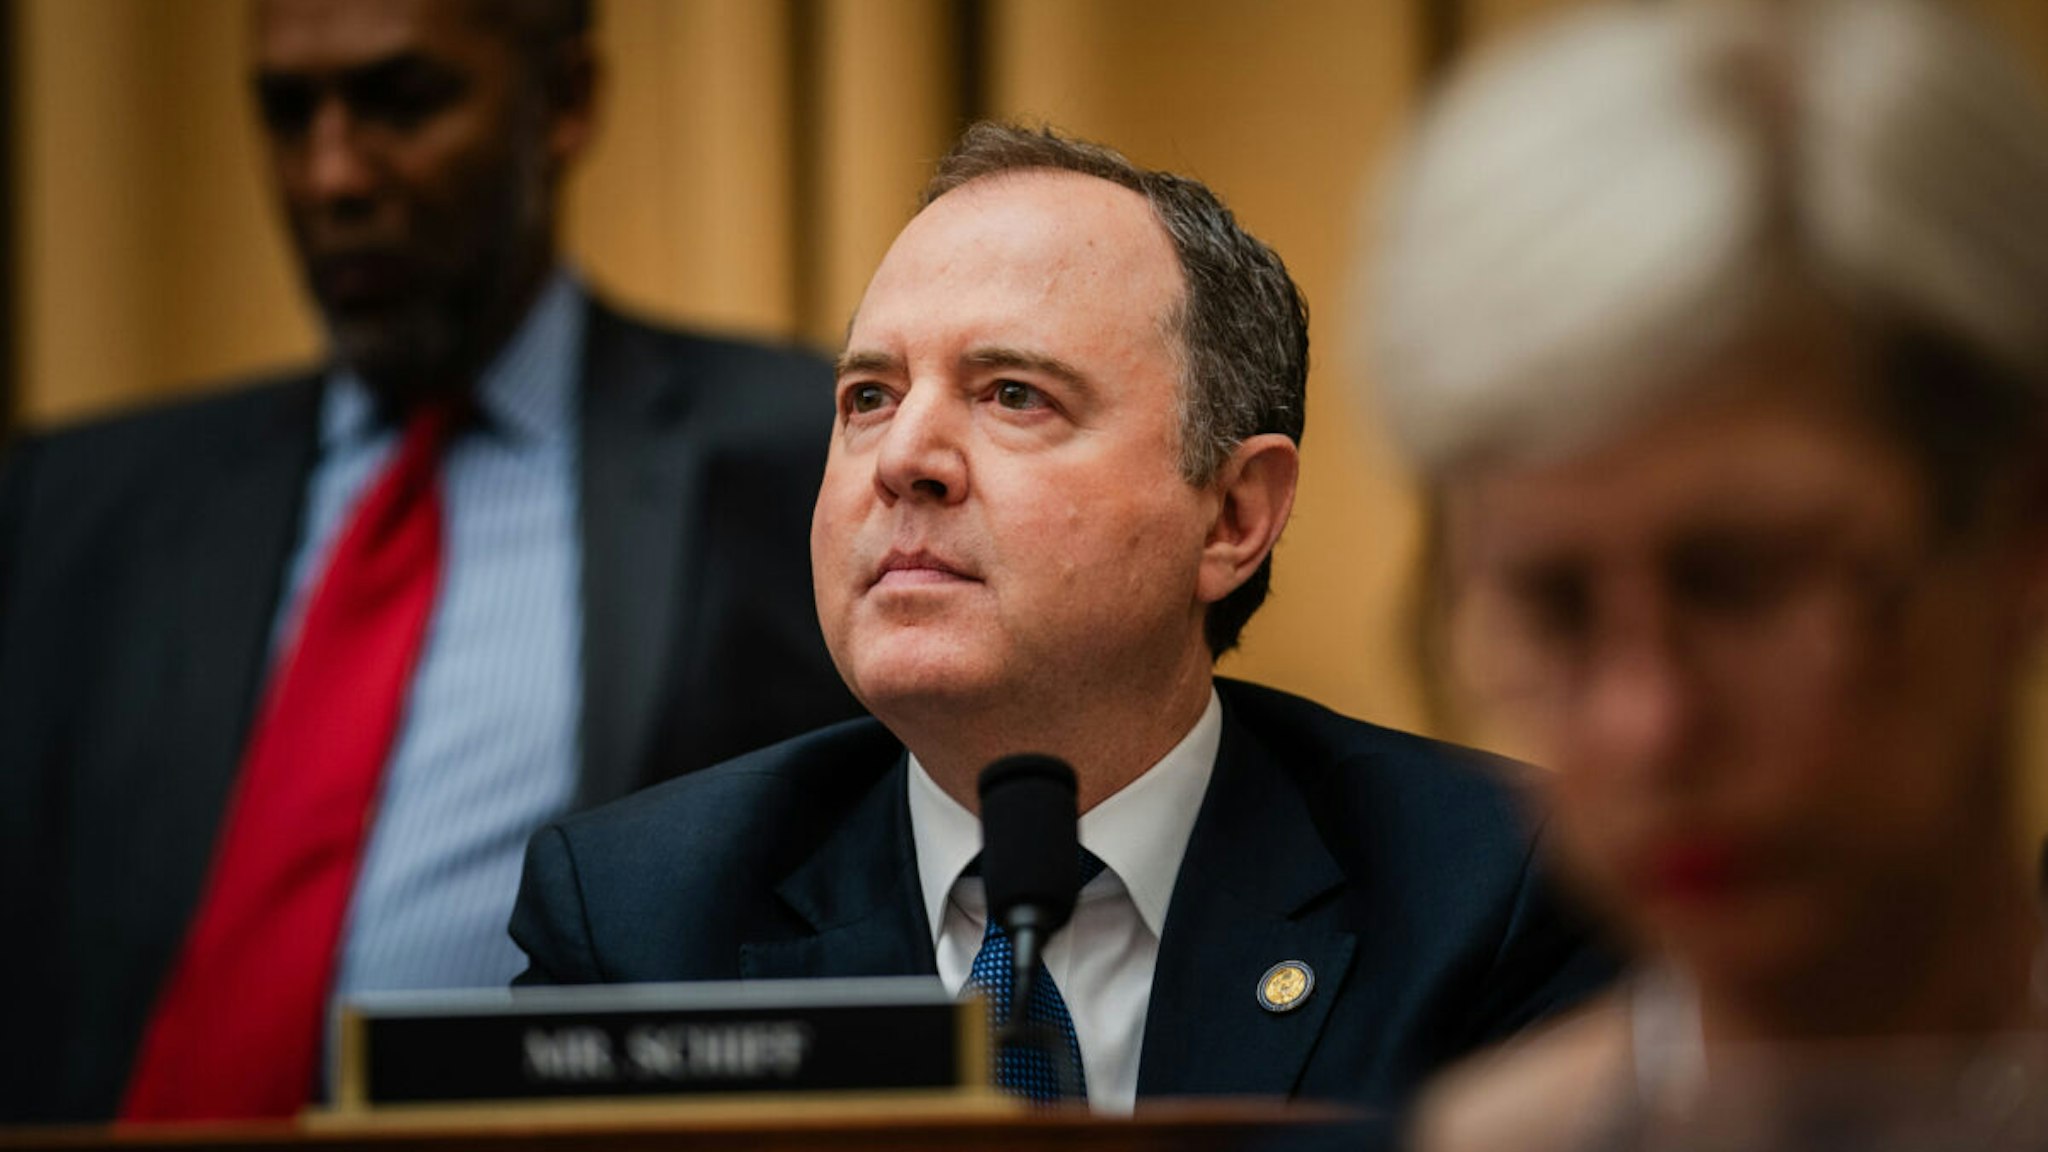 Rep. Adam Schiff (D-CA) looks on during a hearing with former Justice Department Special Counsel John Durham before the House Judiciary Committee at the Rayburn House Office Building on Wednesday, June 21, 2023 in Washington, DC.